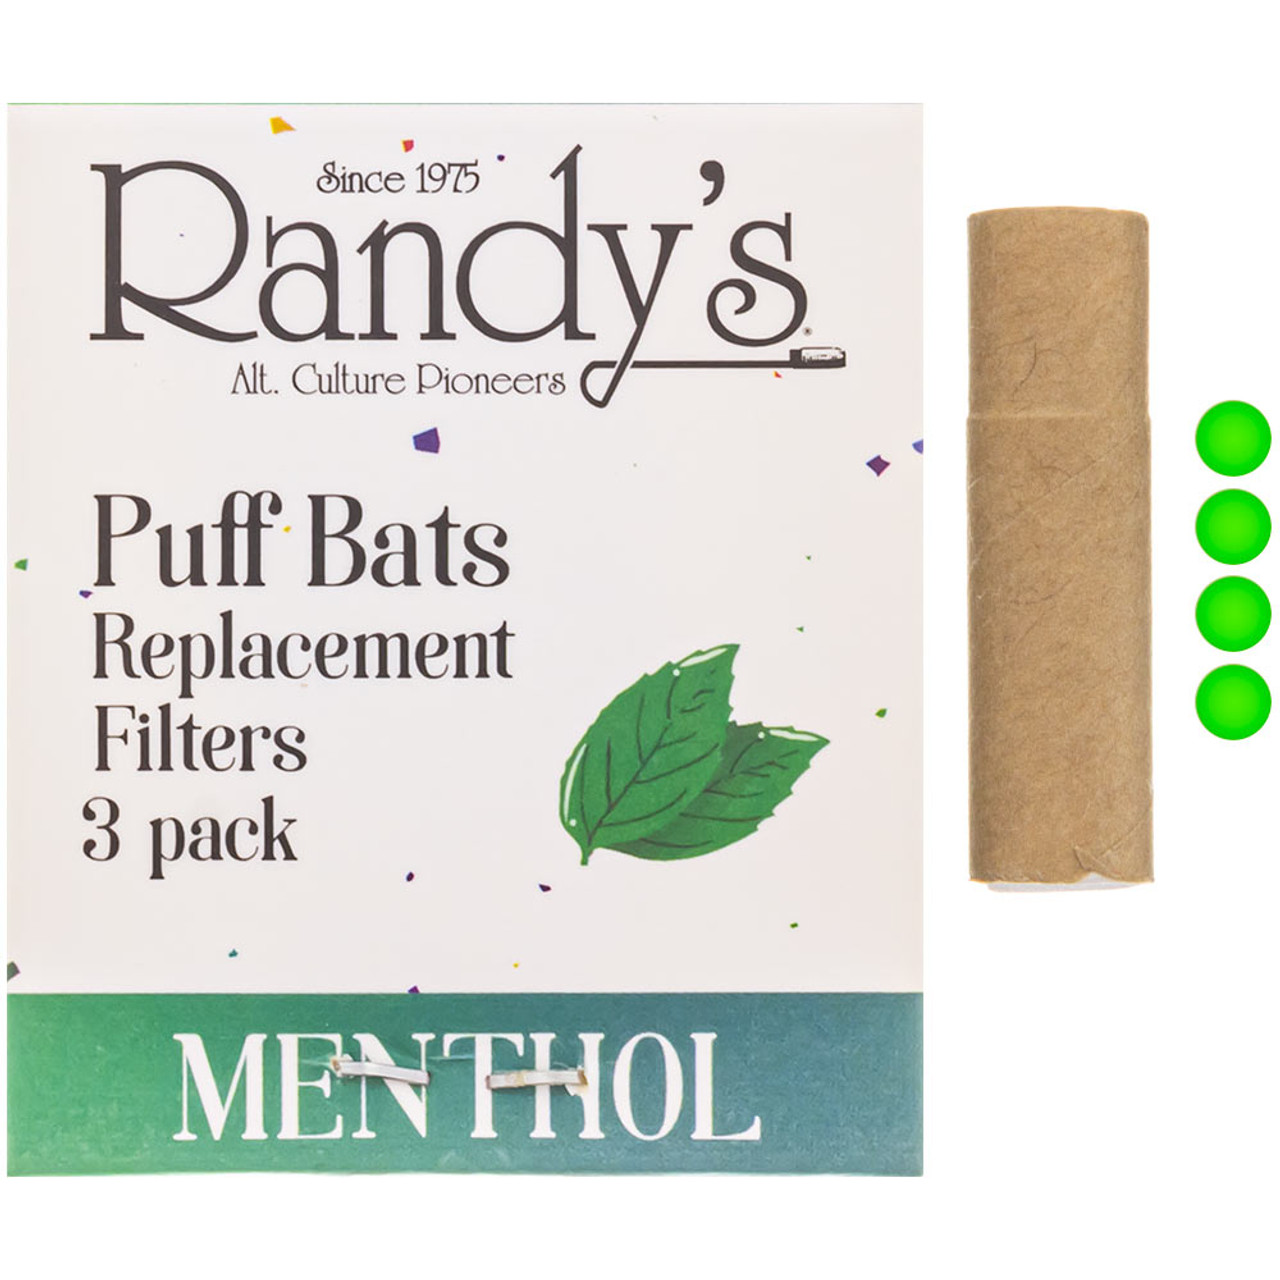 https://cdn11.bigcommerce.com/s-1n8r405nxd/images/stencil/1280x1280/products/11124/23716/80885-C3-Randys-Puff-Bat-Replacement-Filter-Menthol-Flavored-Hemp-Product-Group-Contents__33398.1674663482.jpg?c=2